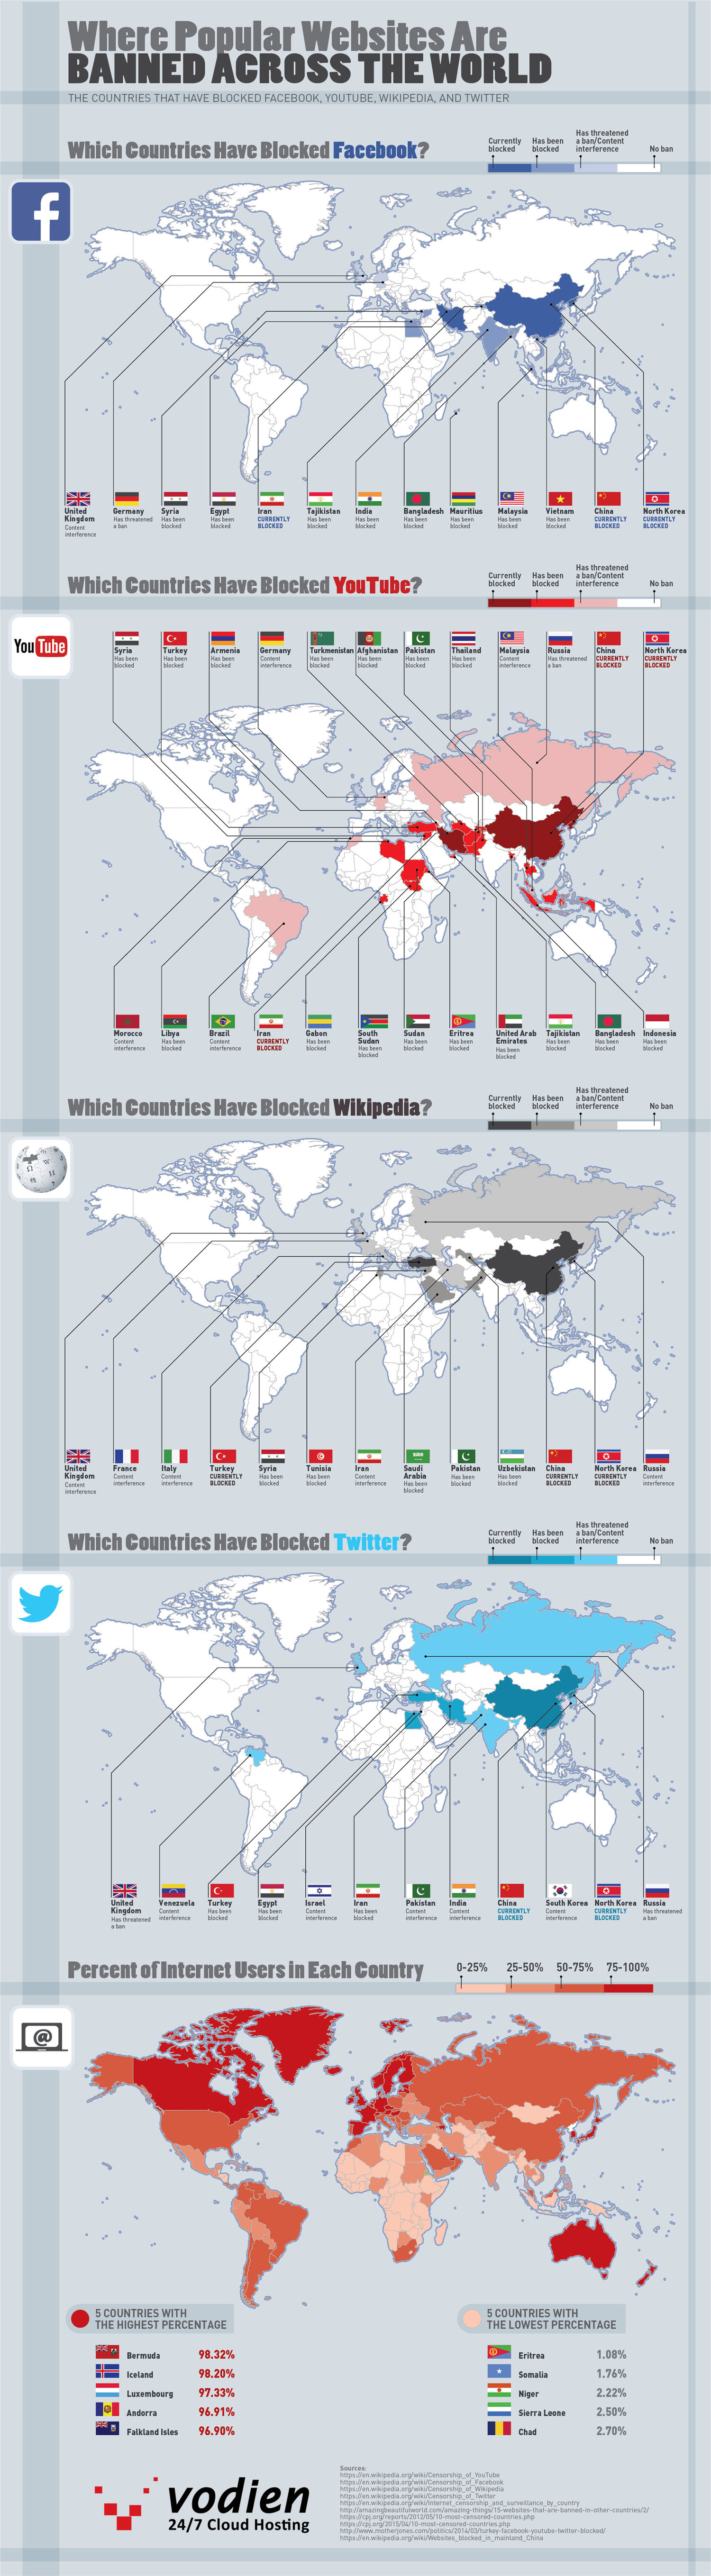 Where Popular Websites Are Banned Across the World